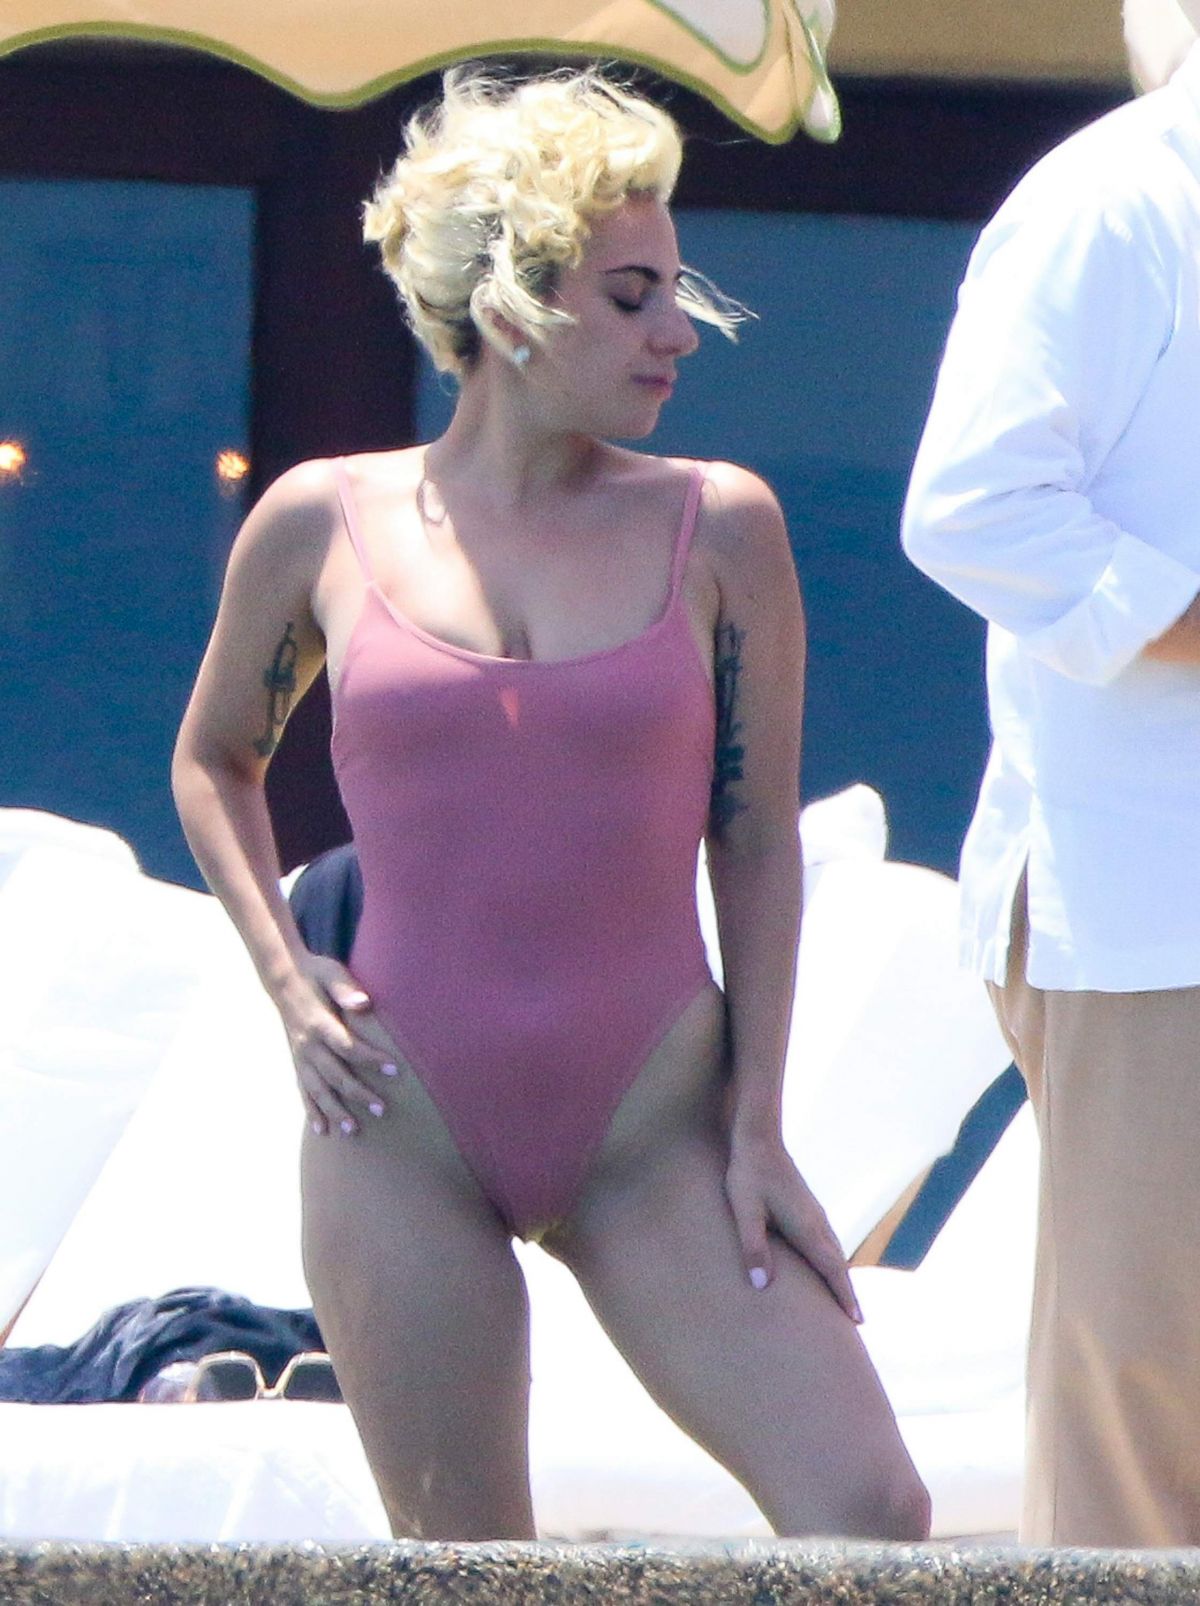 LADY GAGA in Swimsuit at Pedregal Resort in Mexico 07/16/2016.